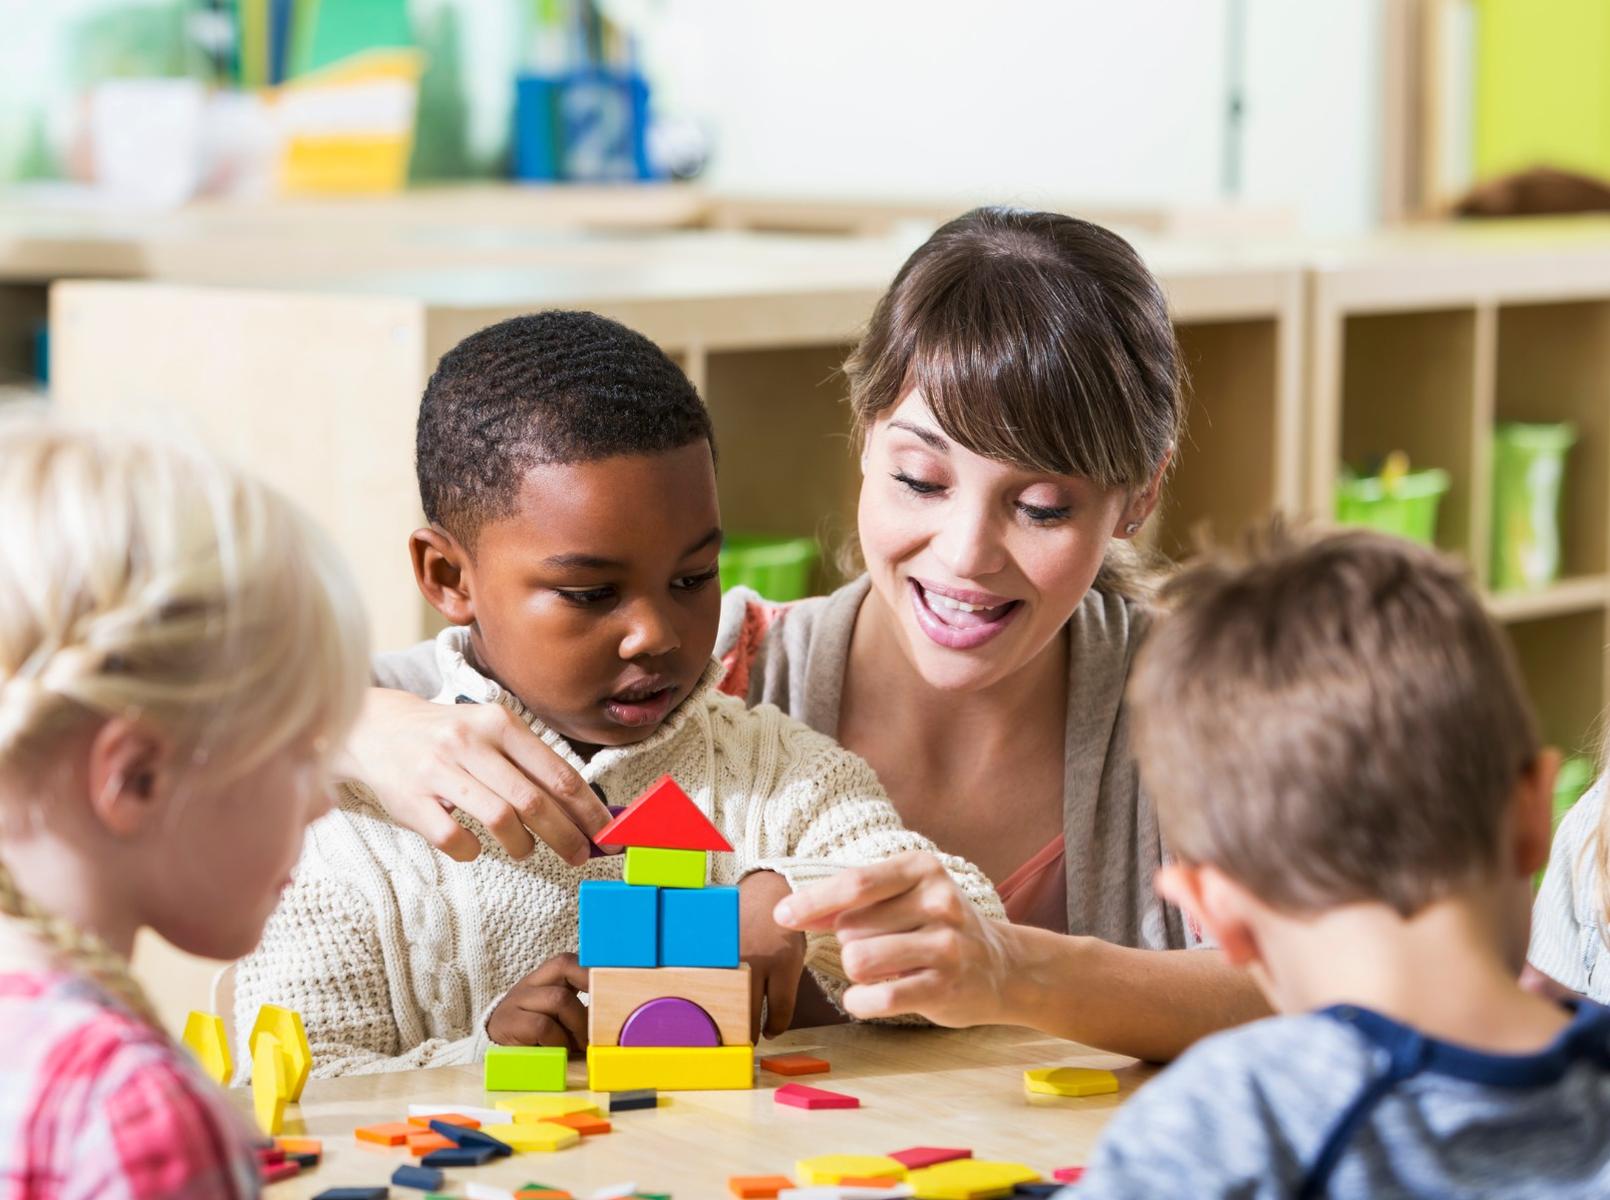 What Is STEM and How Does It Relate to Early Learning?